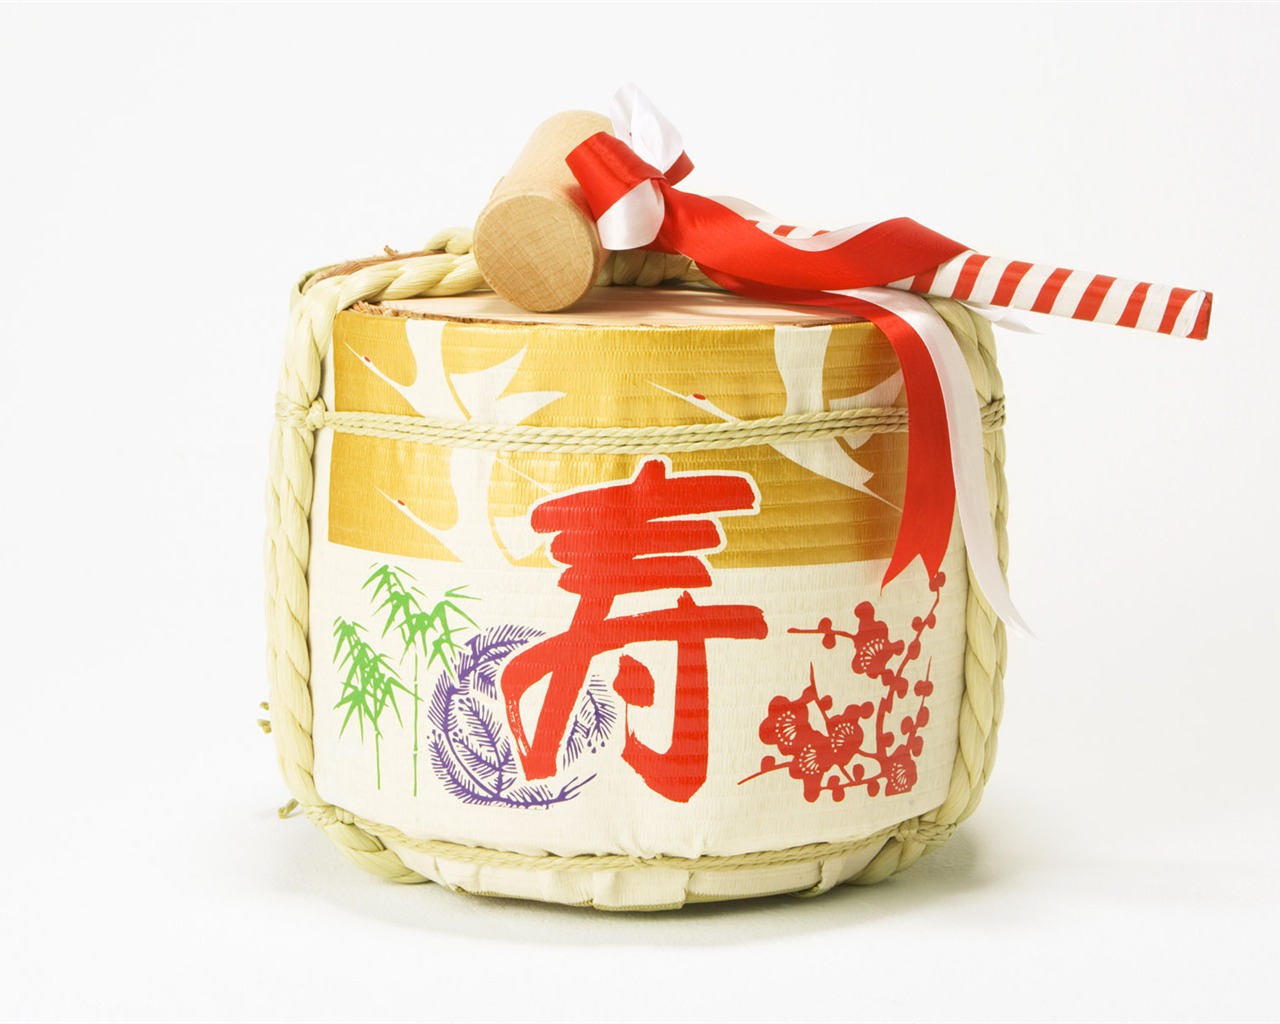 Japanese New Year Culture Wallpaper (2) #12 - 1280x1024